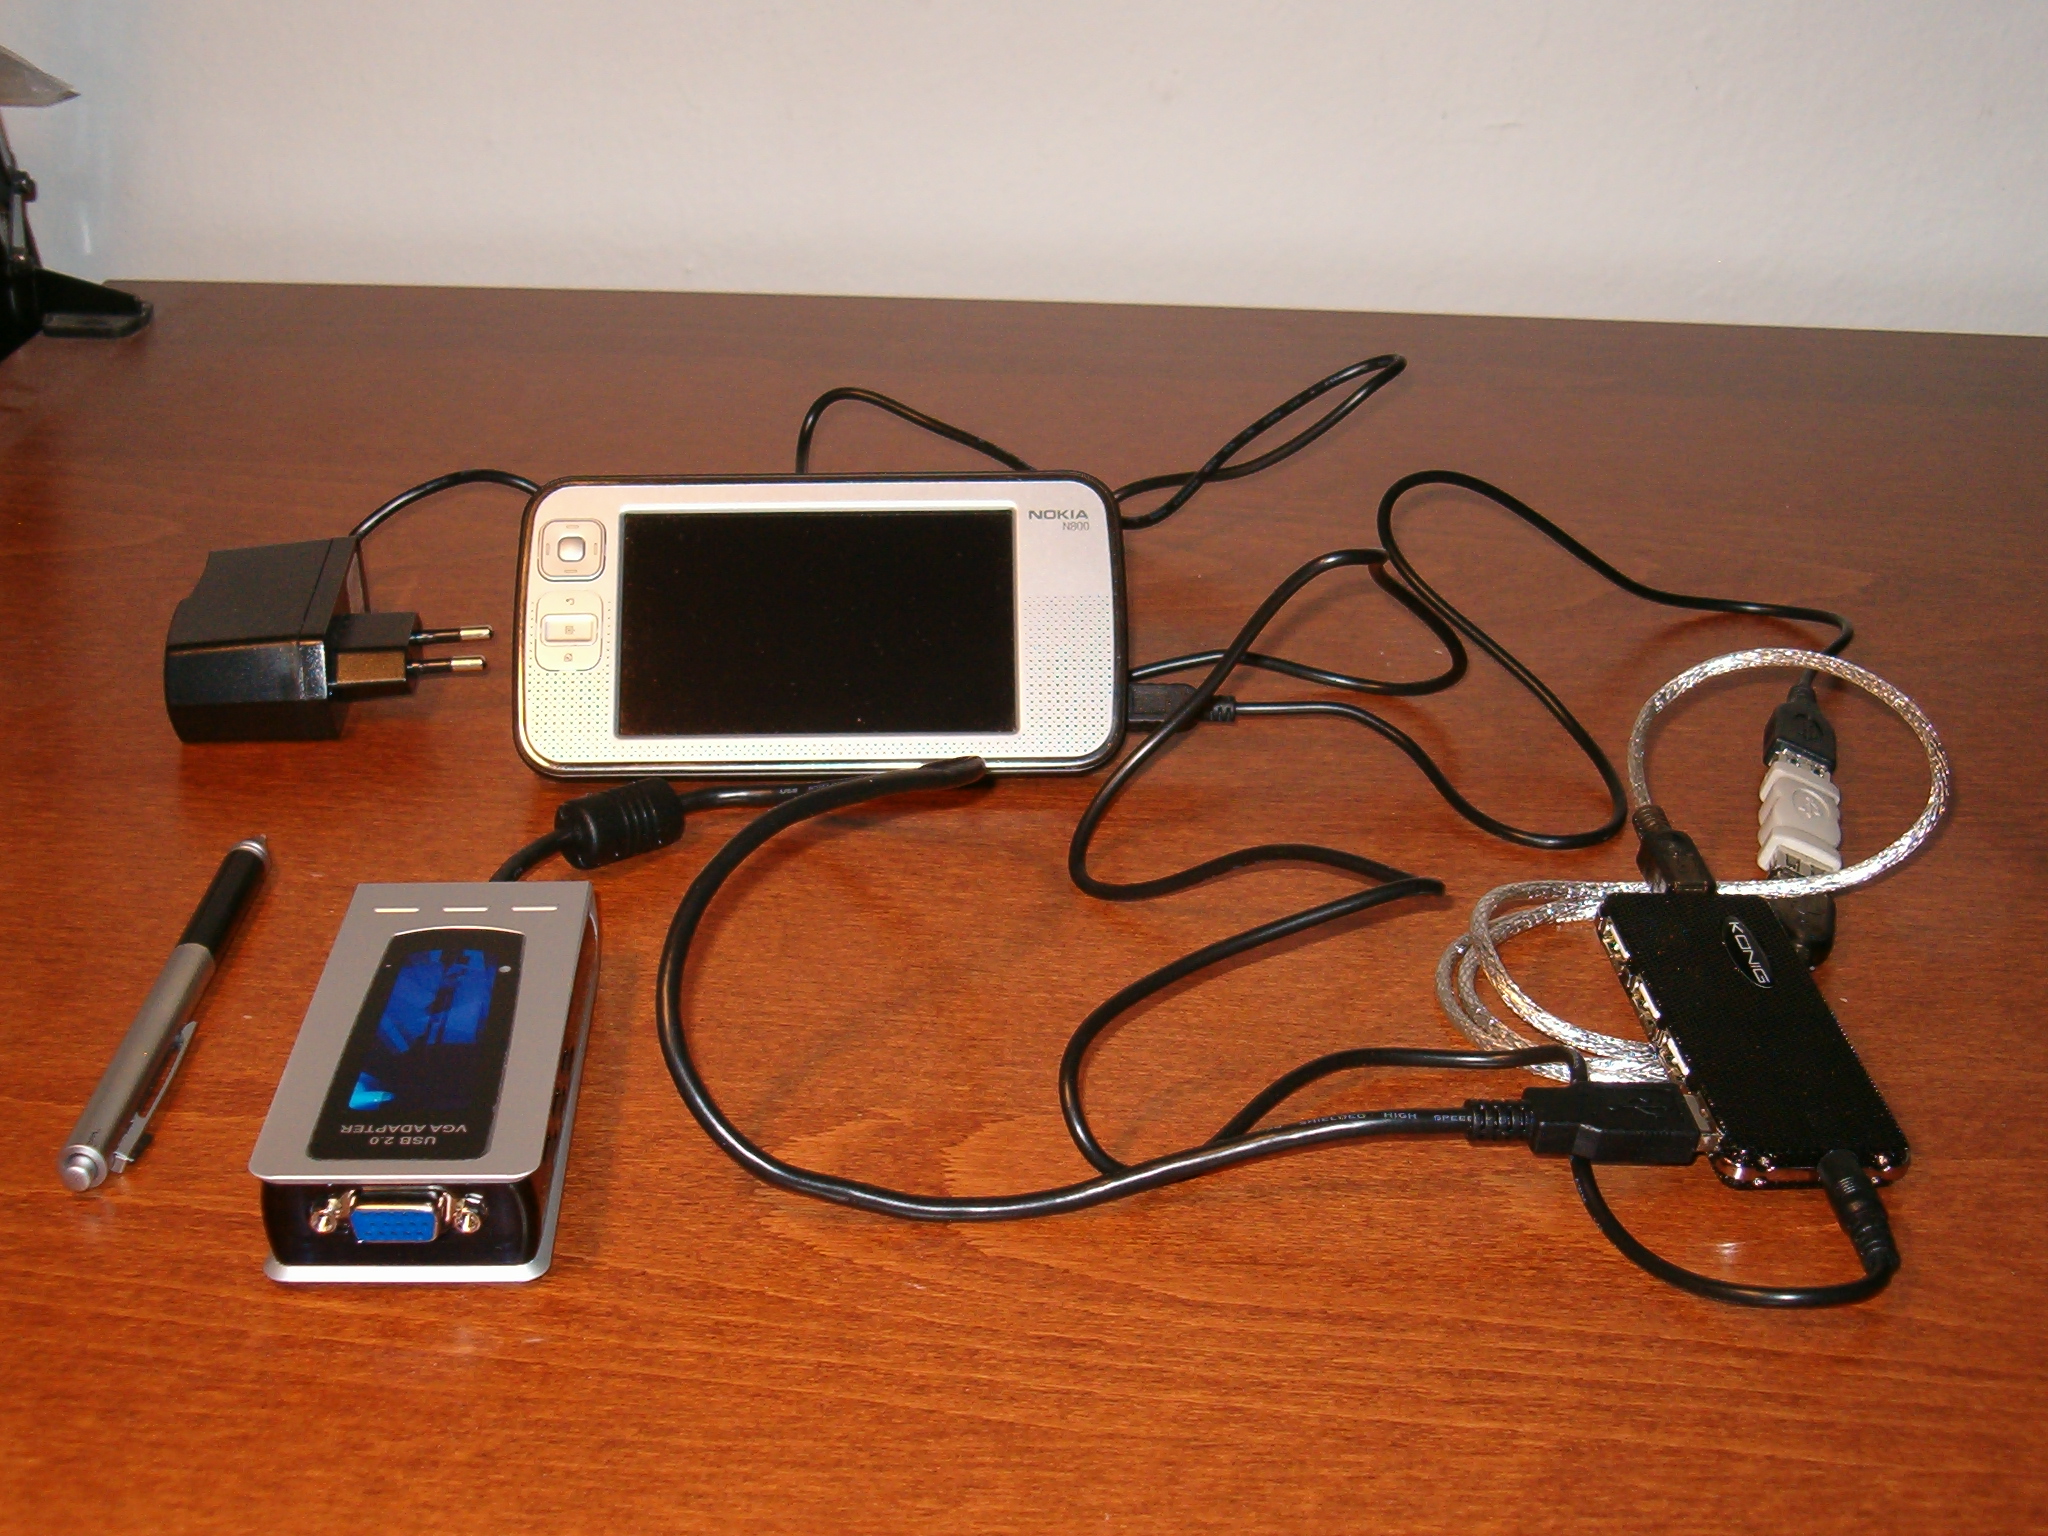 various electronic equipment are laying out on a table